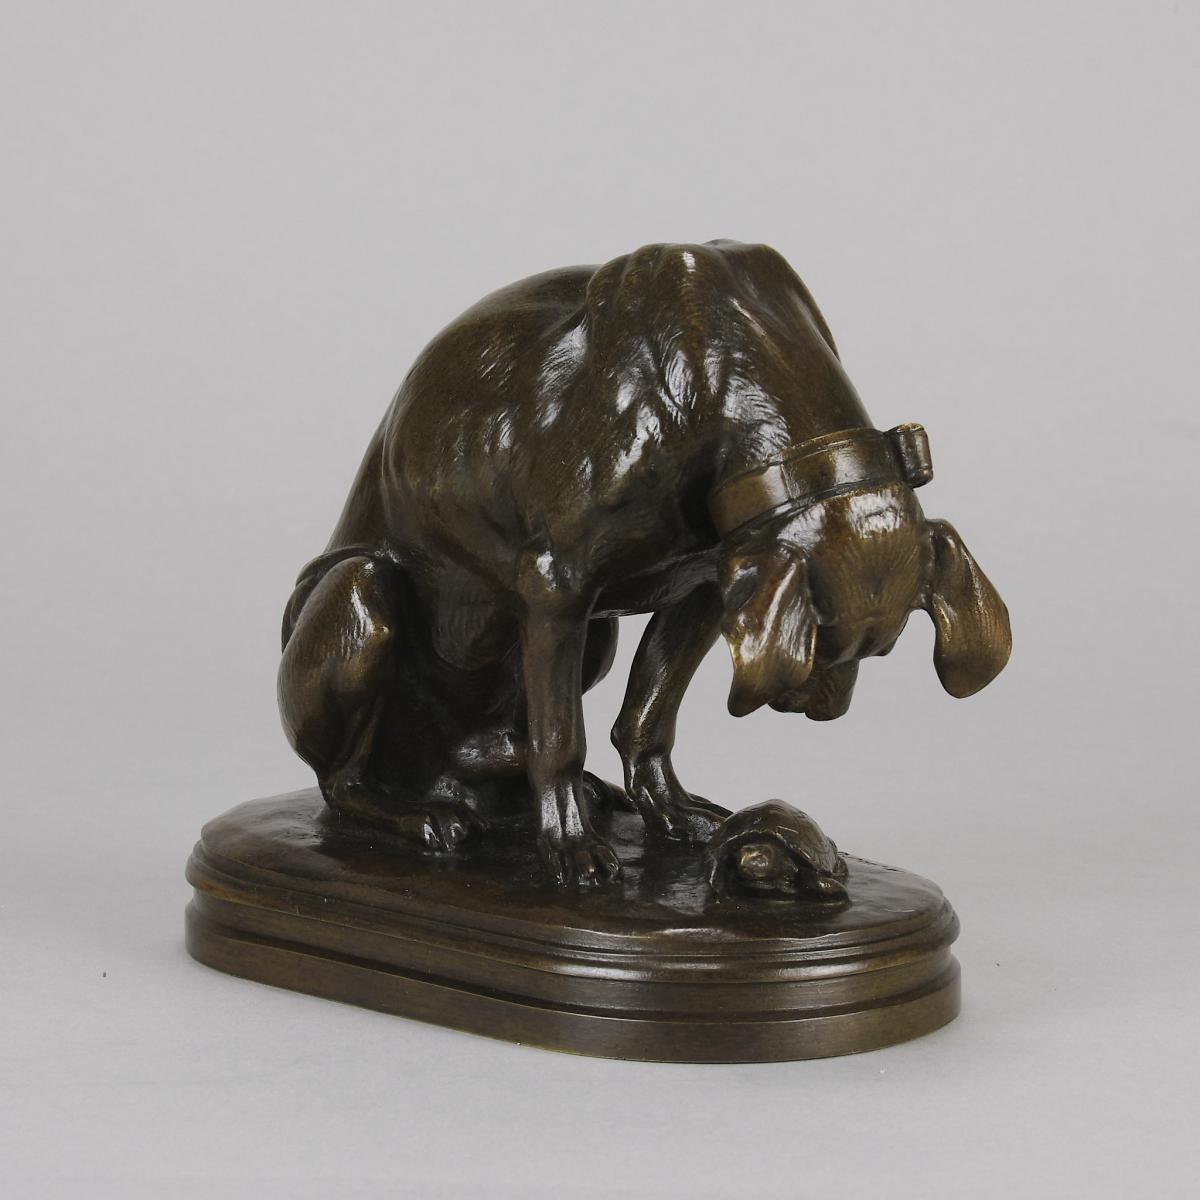 French Animalier bronze entitled "Chien et Tortue" by Alfred Jacquemart - Circa 1900